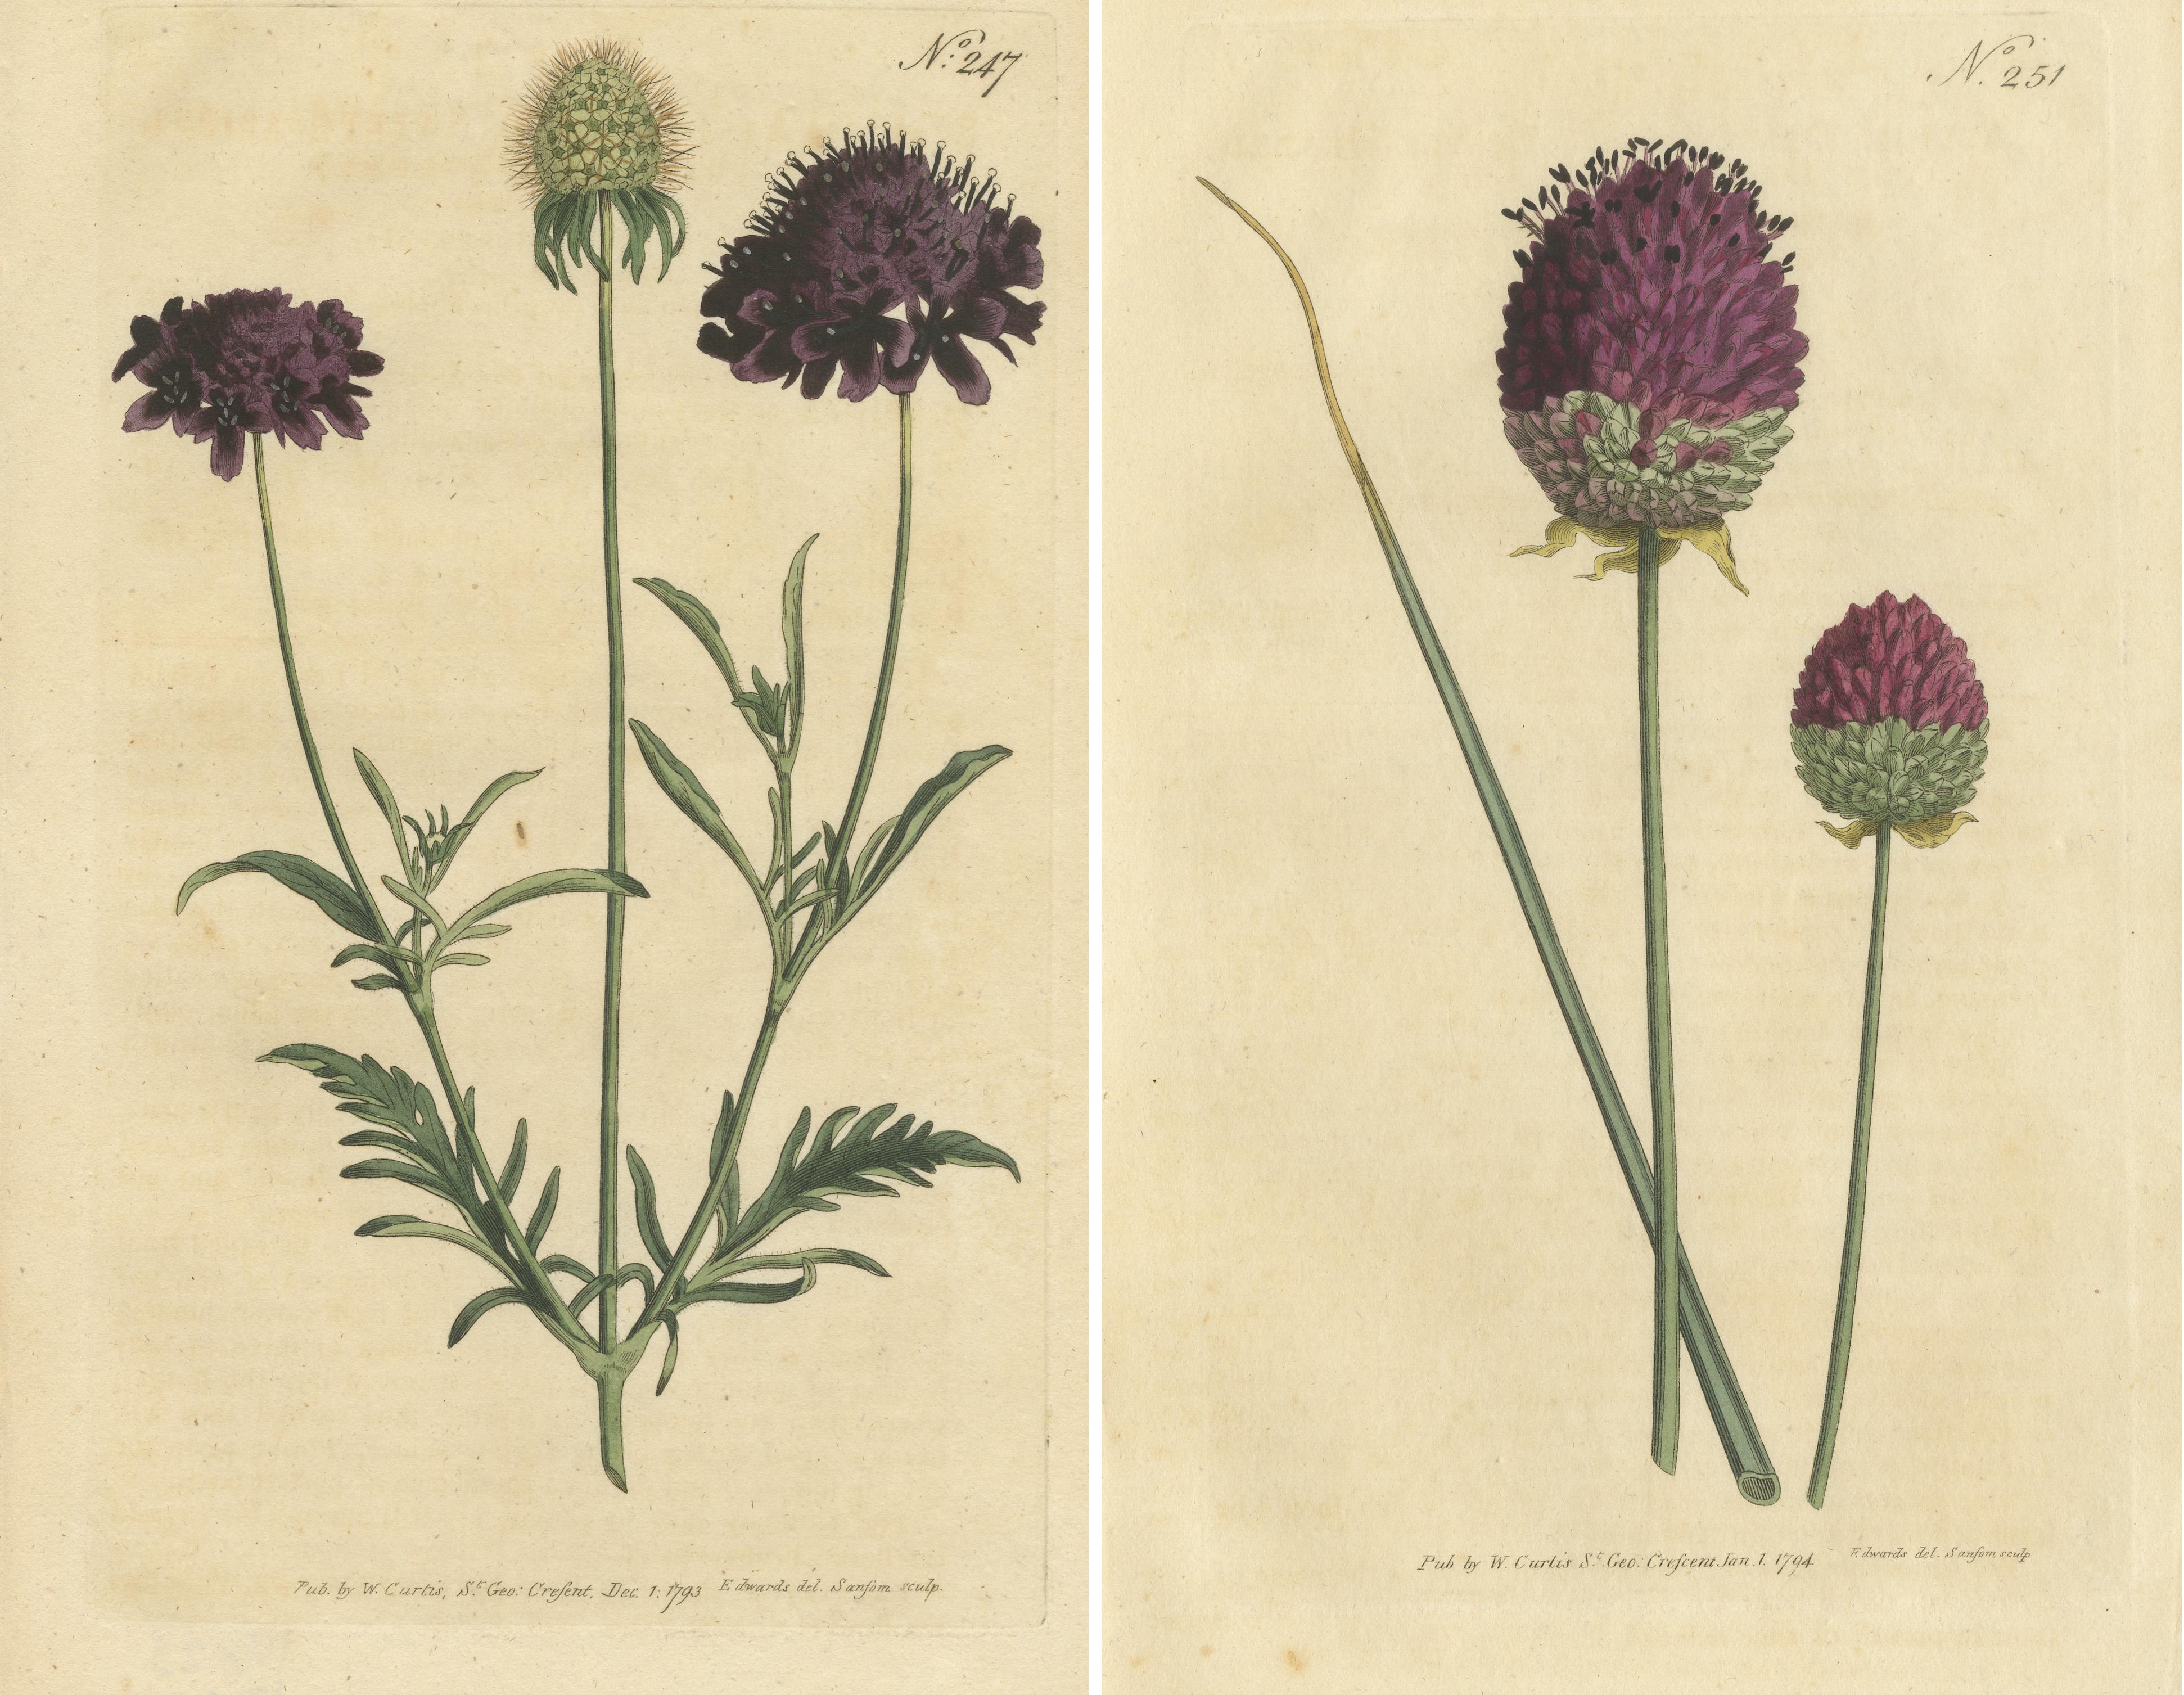 Set of 2 antique botany prints. It shows the Sweet Scabious and the Purple-Headed Garlic. These prints originate from 'The Botanical Magazine; or Flower-Garden Displayed (..)' by William Curtis. Published 1794. 

The Botanical Magazine; or